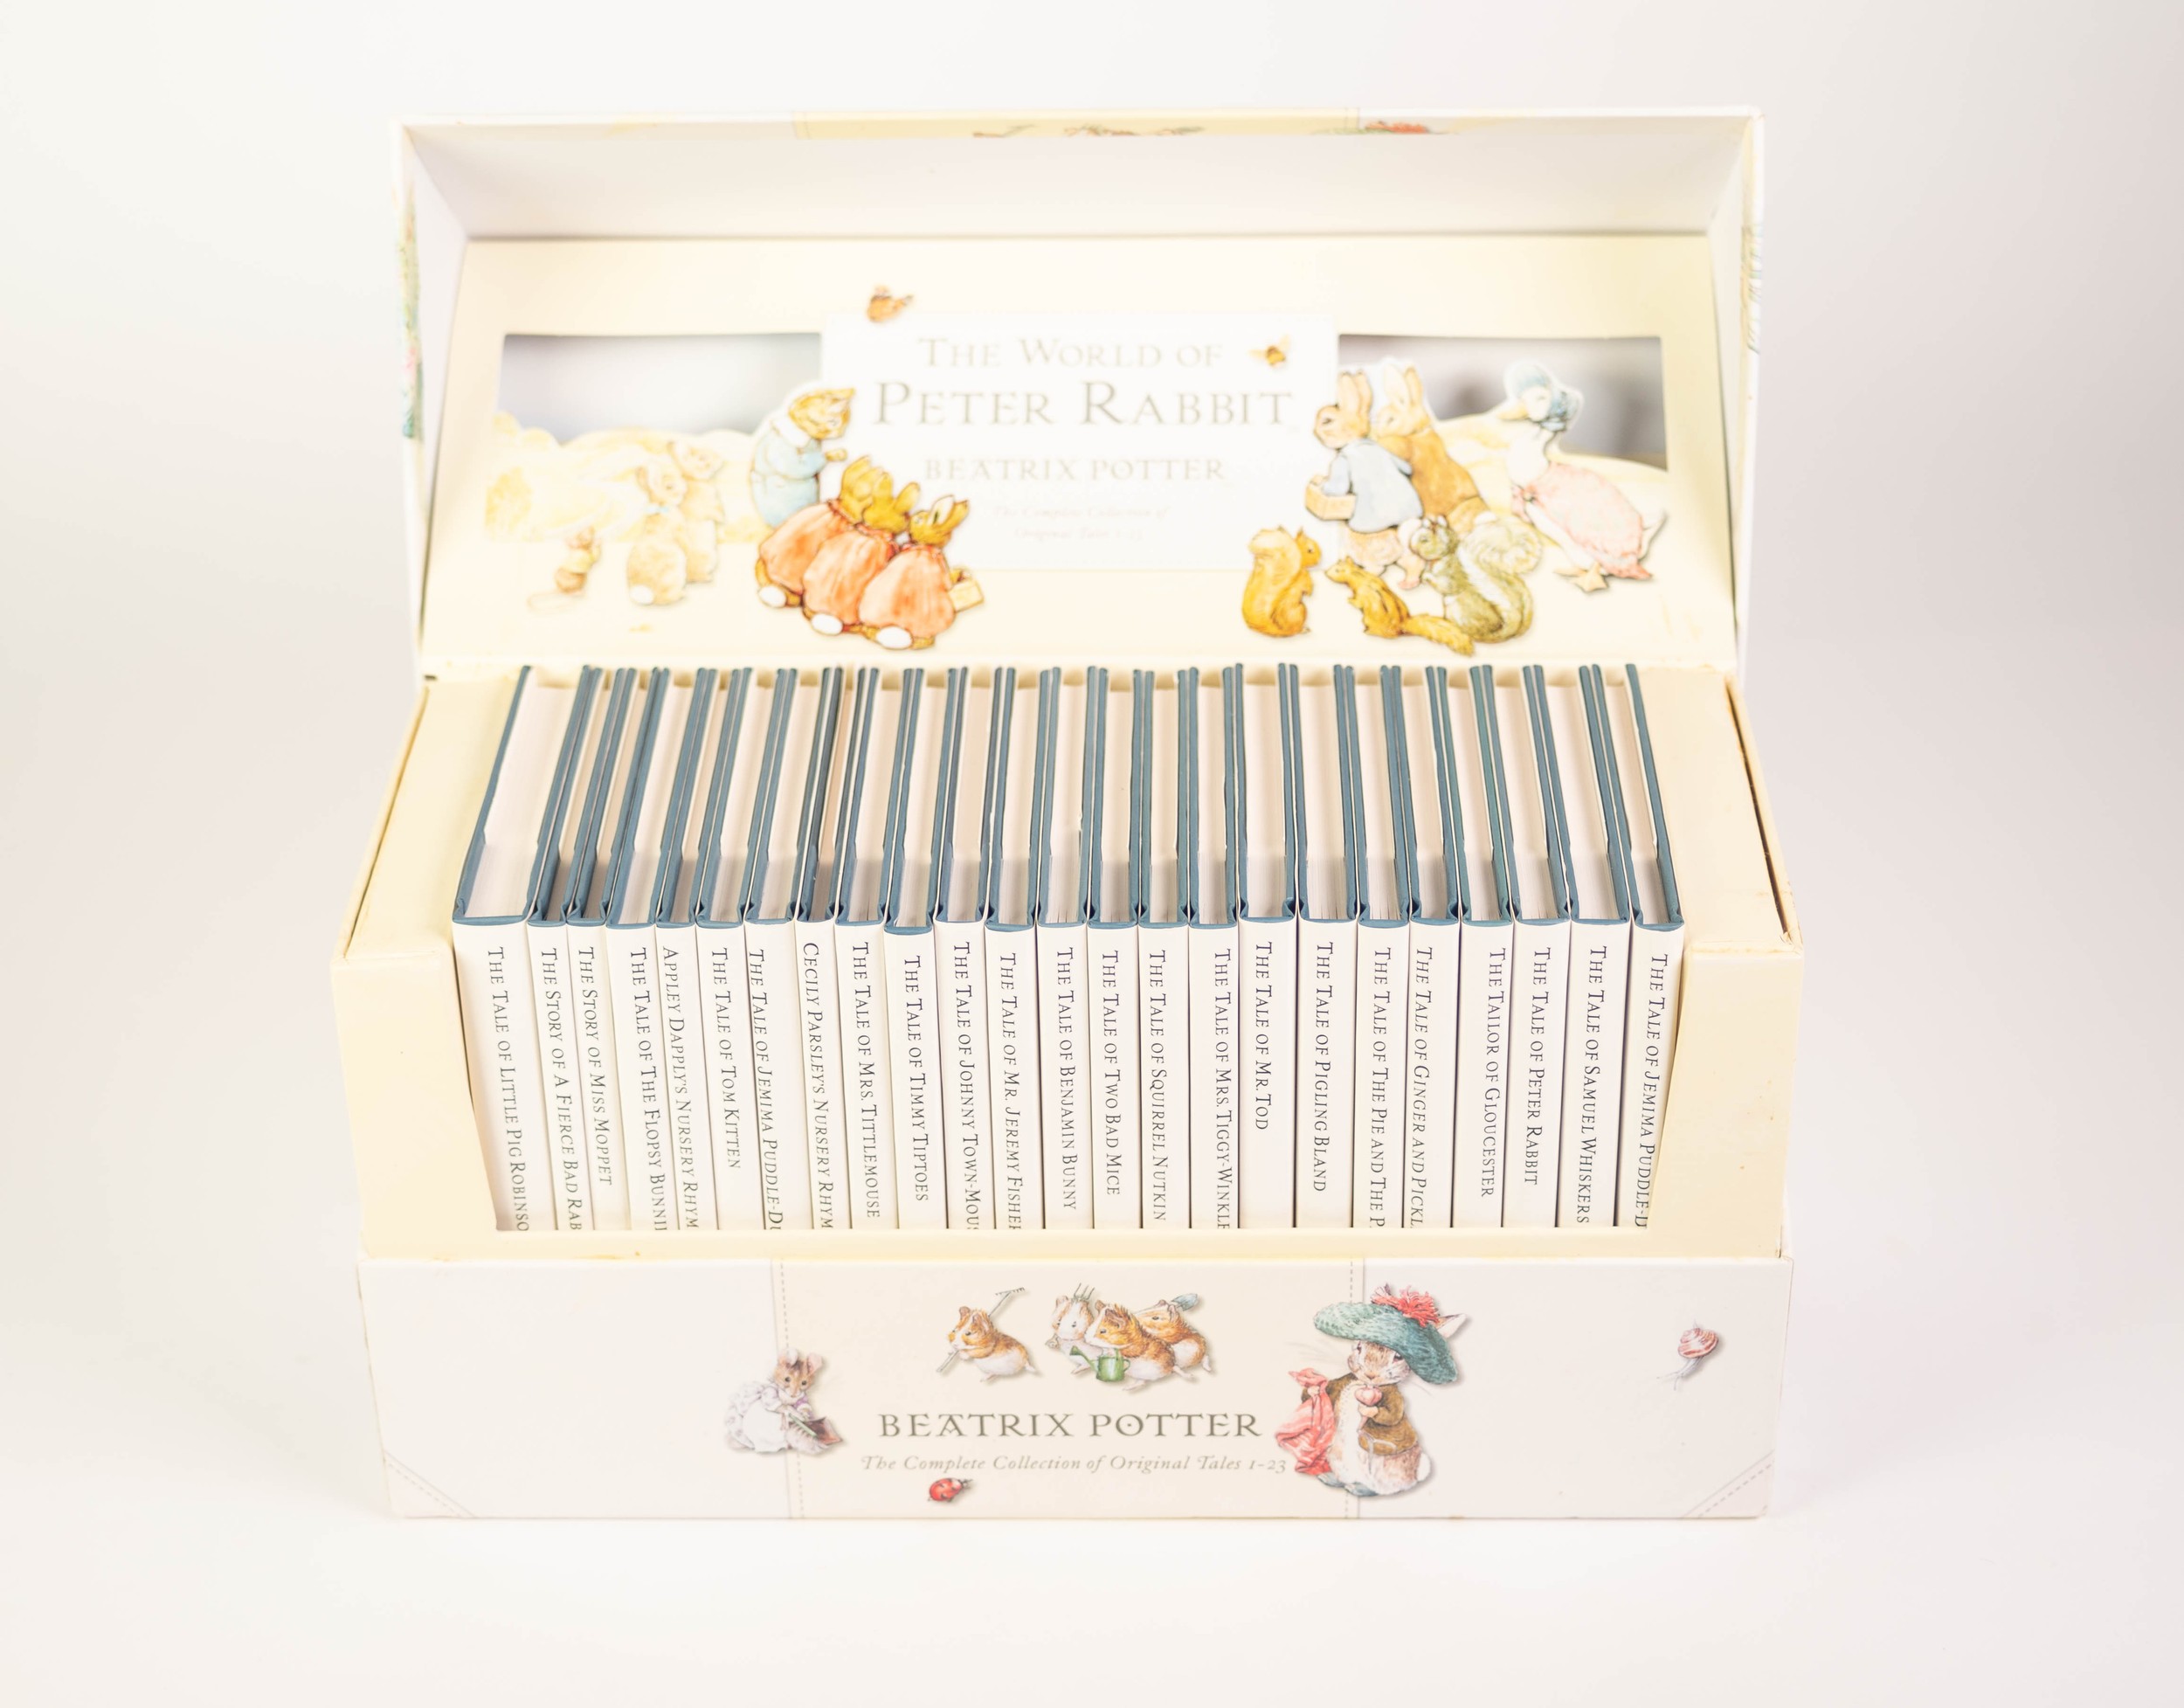 F. WARNE AND CO. COMPLETE BOXED SET OF 23 BEATRIX POTTER PETER RABBIT PUBLICATIONS, in display box - Image 2 of 2